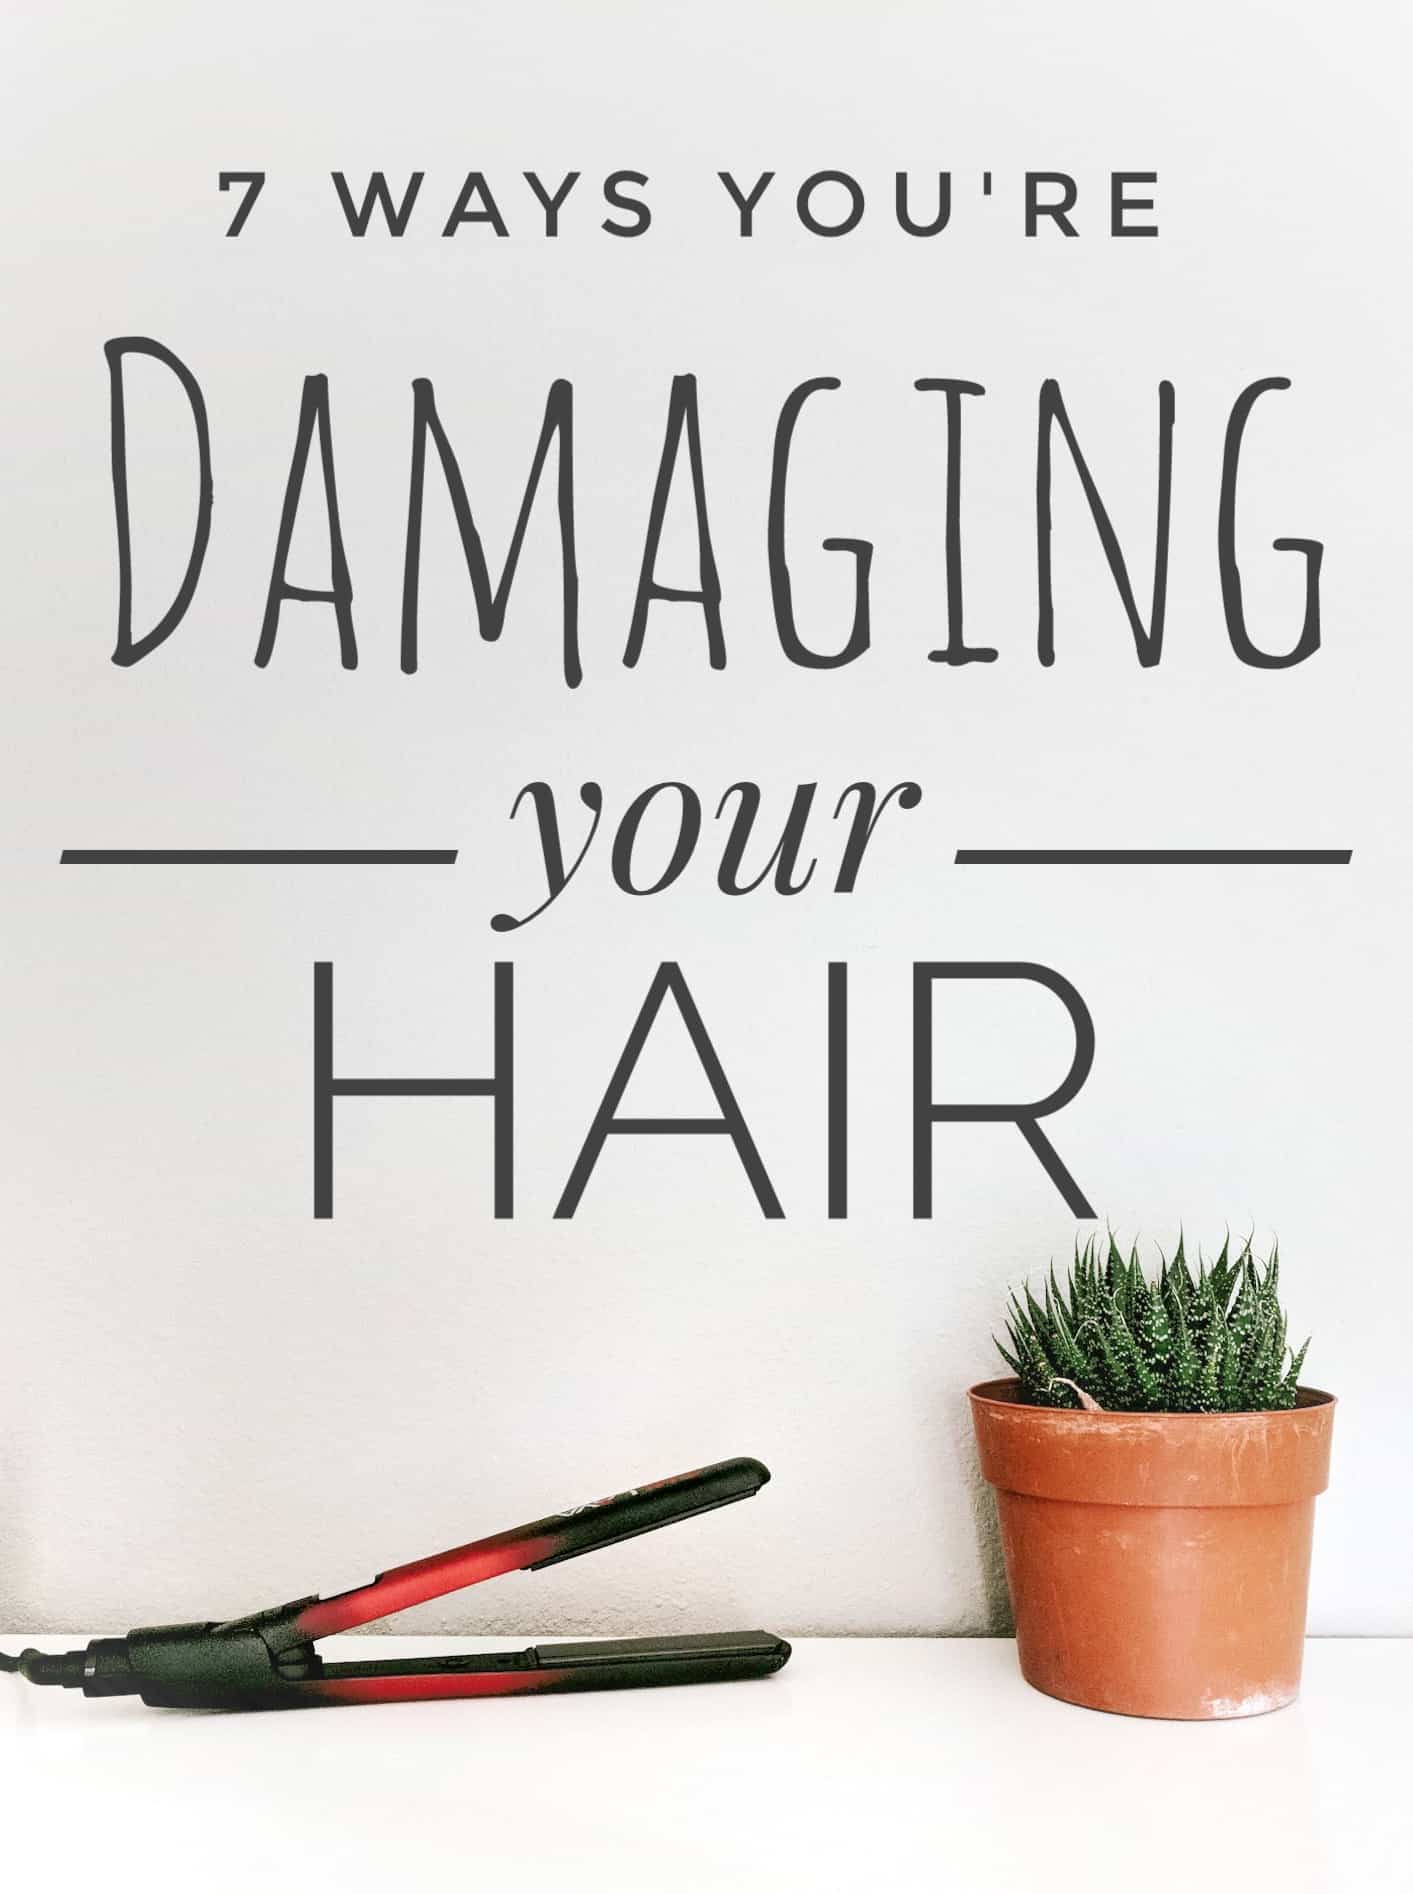 7 Ways You're Damaging Your Hair